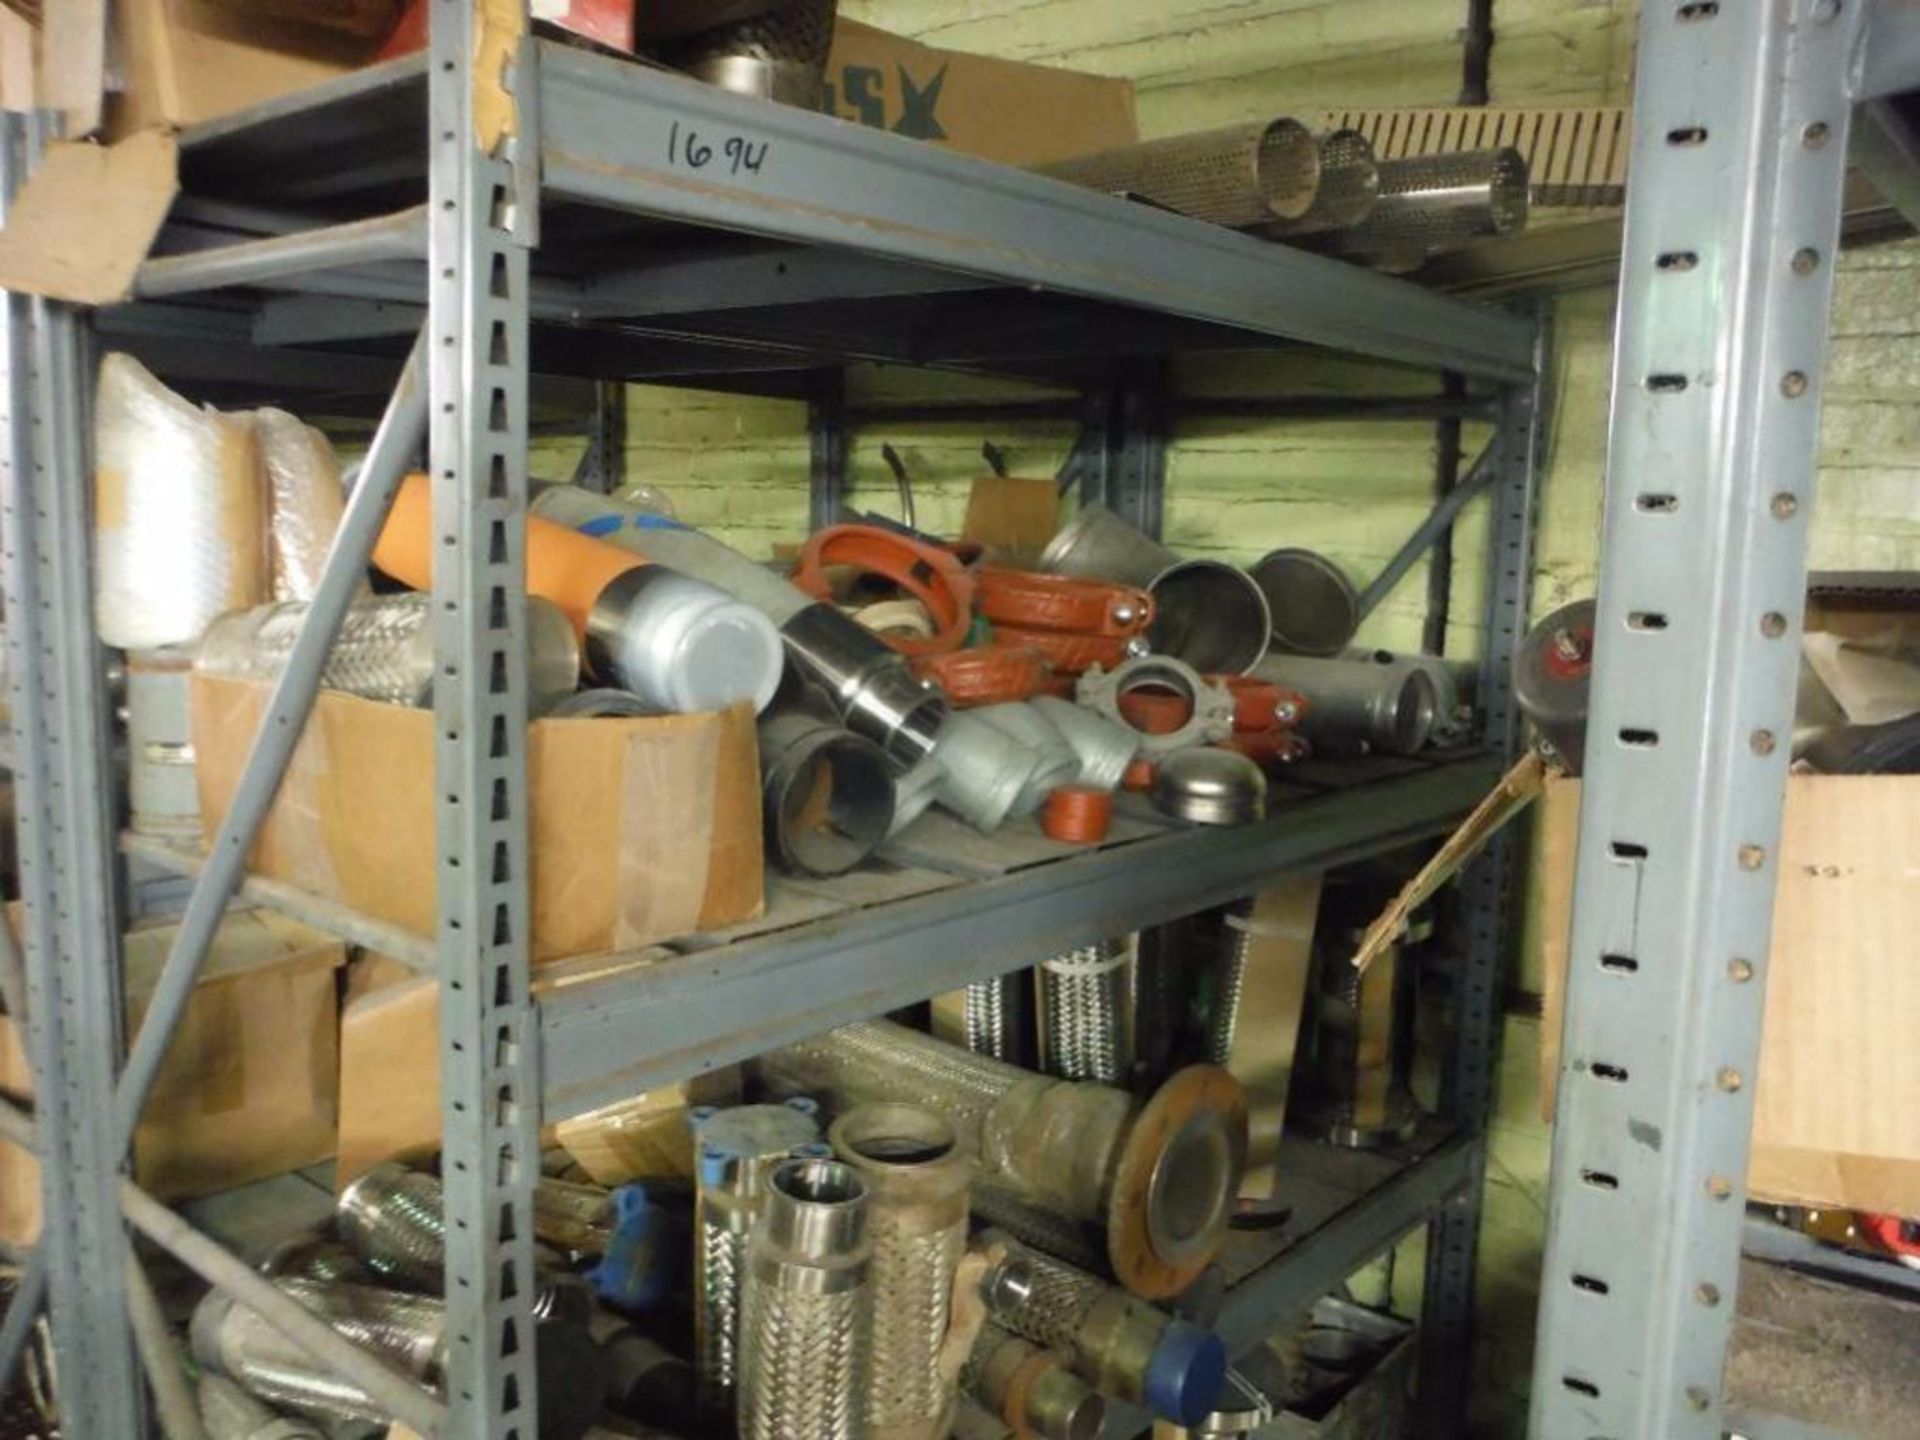 10 Shelves & content: Miscellaneous valves, fittings, brushes, and parts  Rigging Fee: $1000 - Image 11 of 14